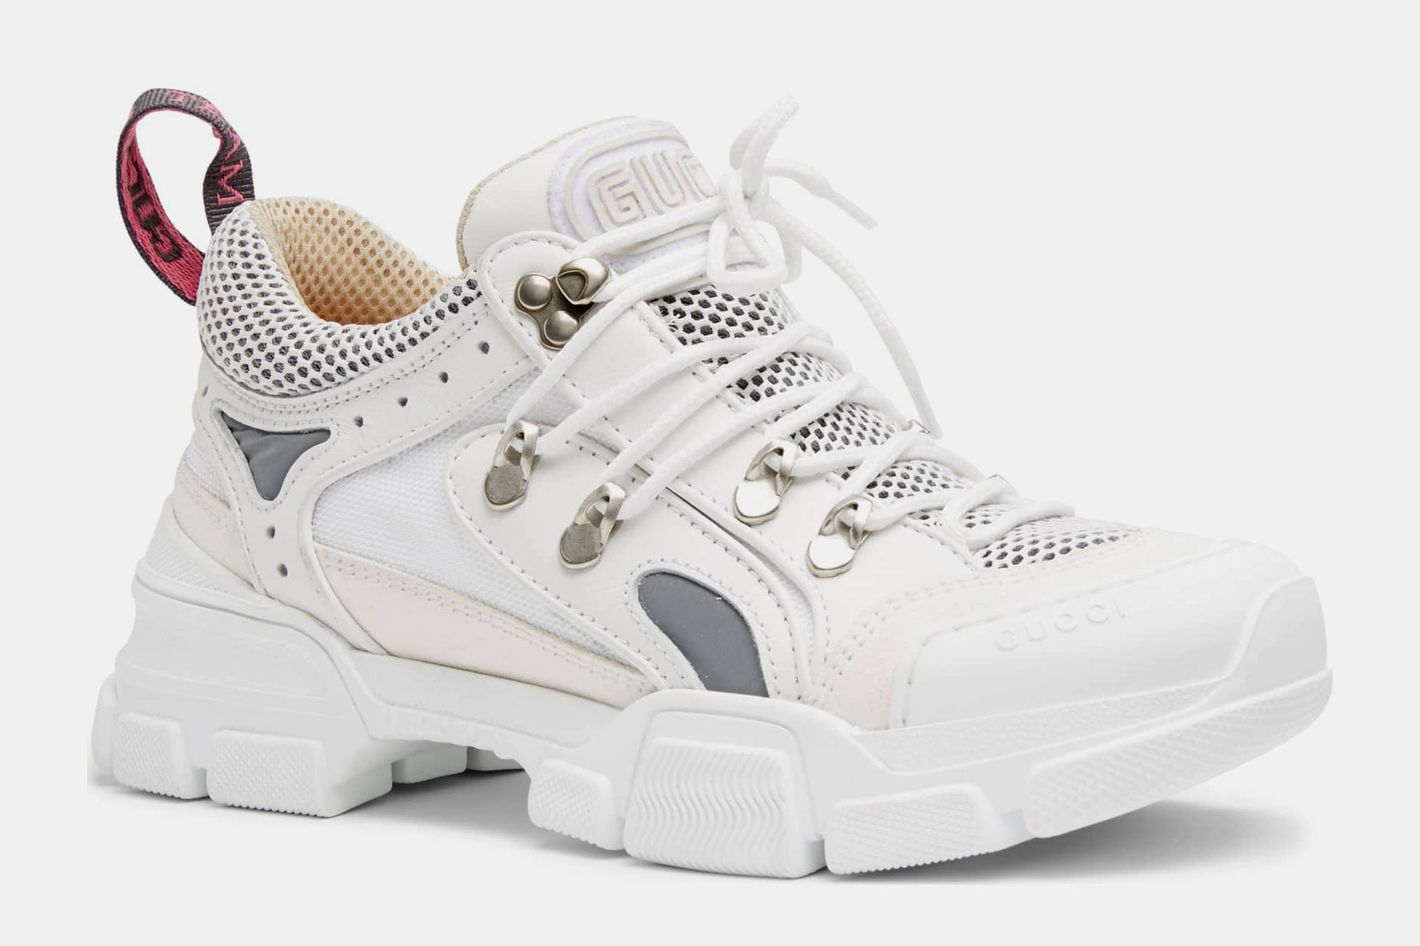 Fashion Trend Guide: The Look for Less - Louis Vuitton Archlight Sneaker  Dupes